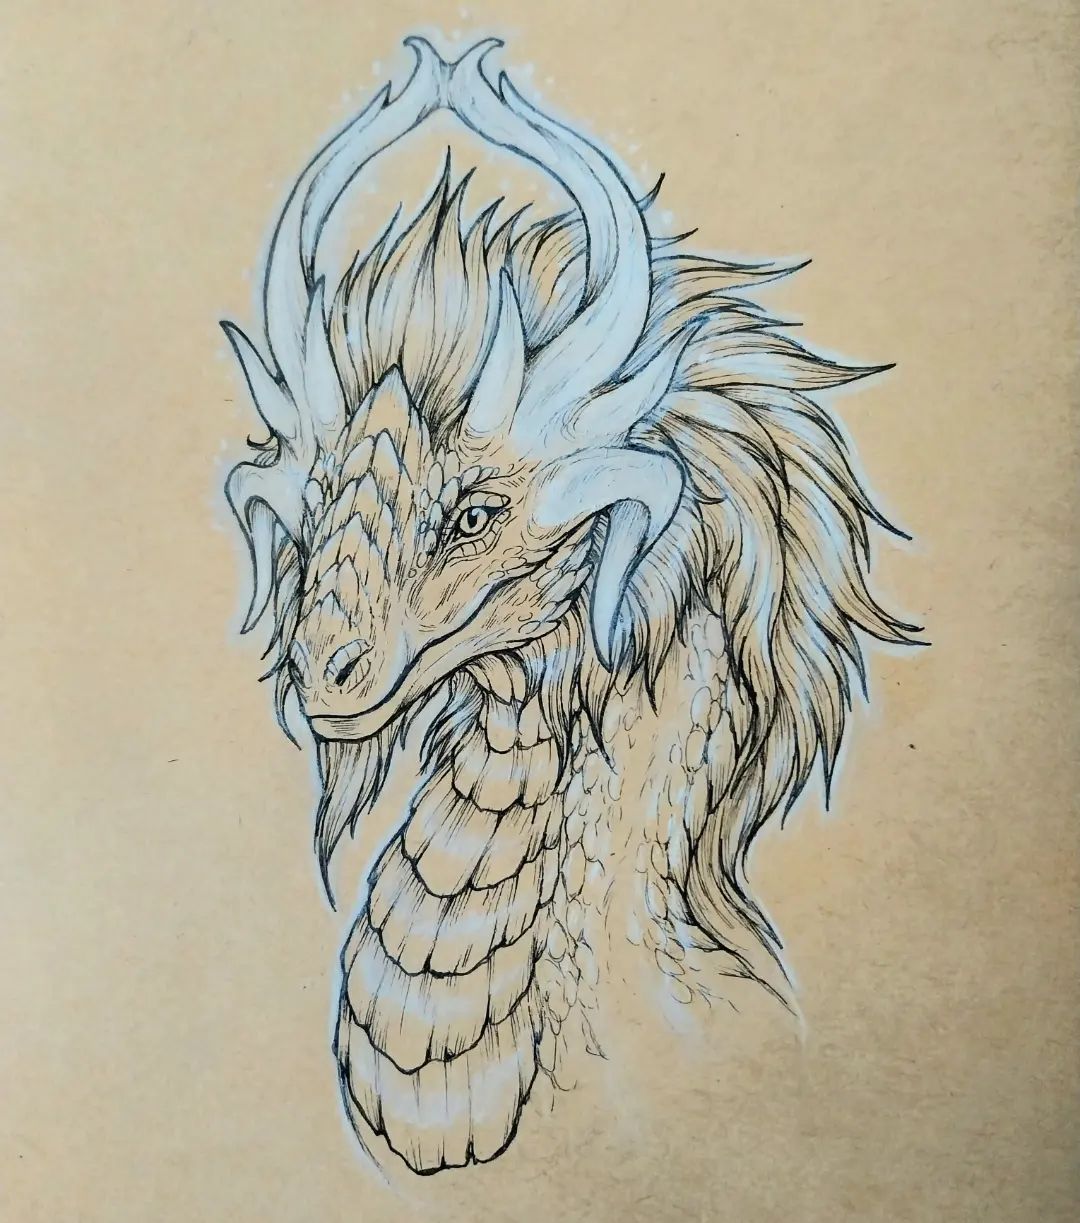 12. @maahismaaria drawing of a dragon with a fur mane on toned paper